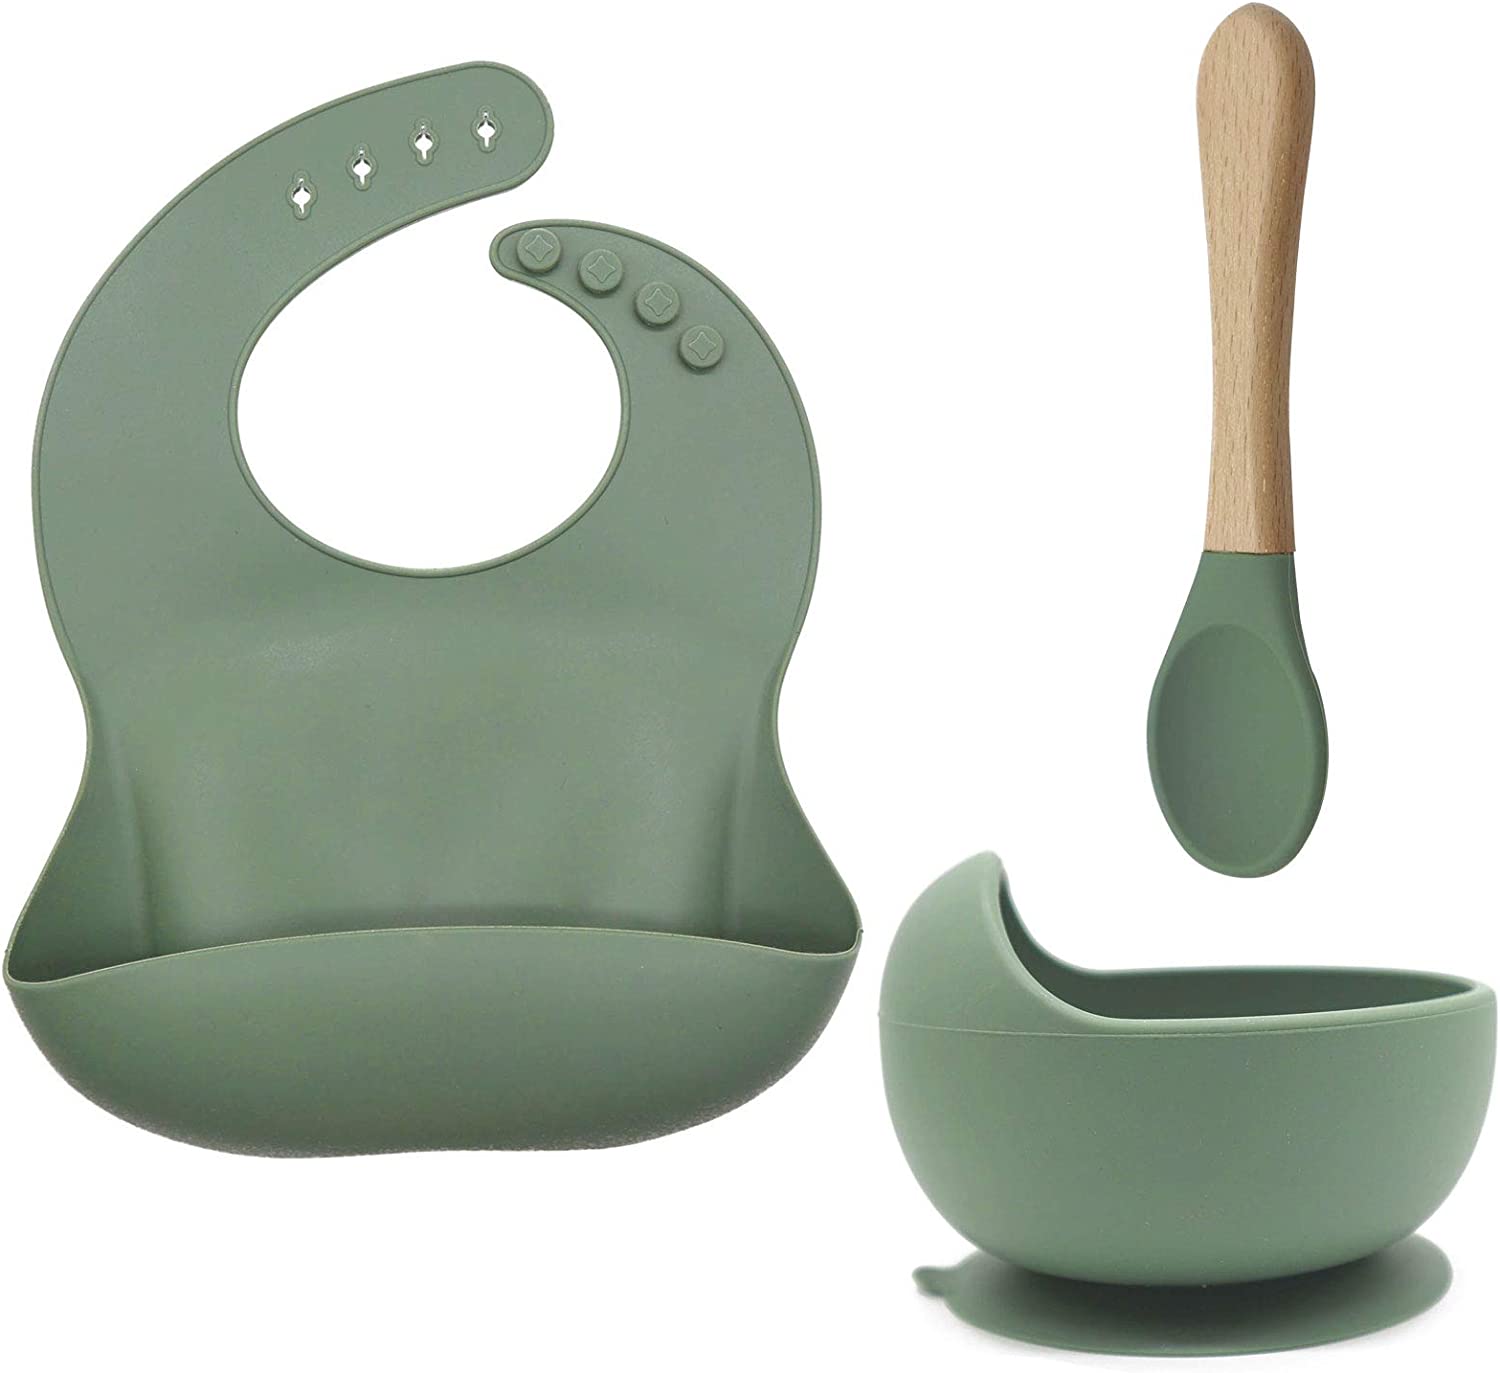 Ginbear Baby Bowls with Suction First Stage, Silicone Bibs, Baby Feeding Spoons, Baby Led Weaning Supplies for Ages 6 Months+ (Hazy Green)